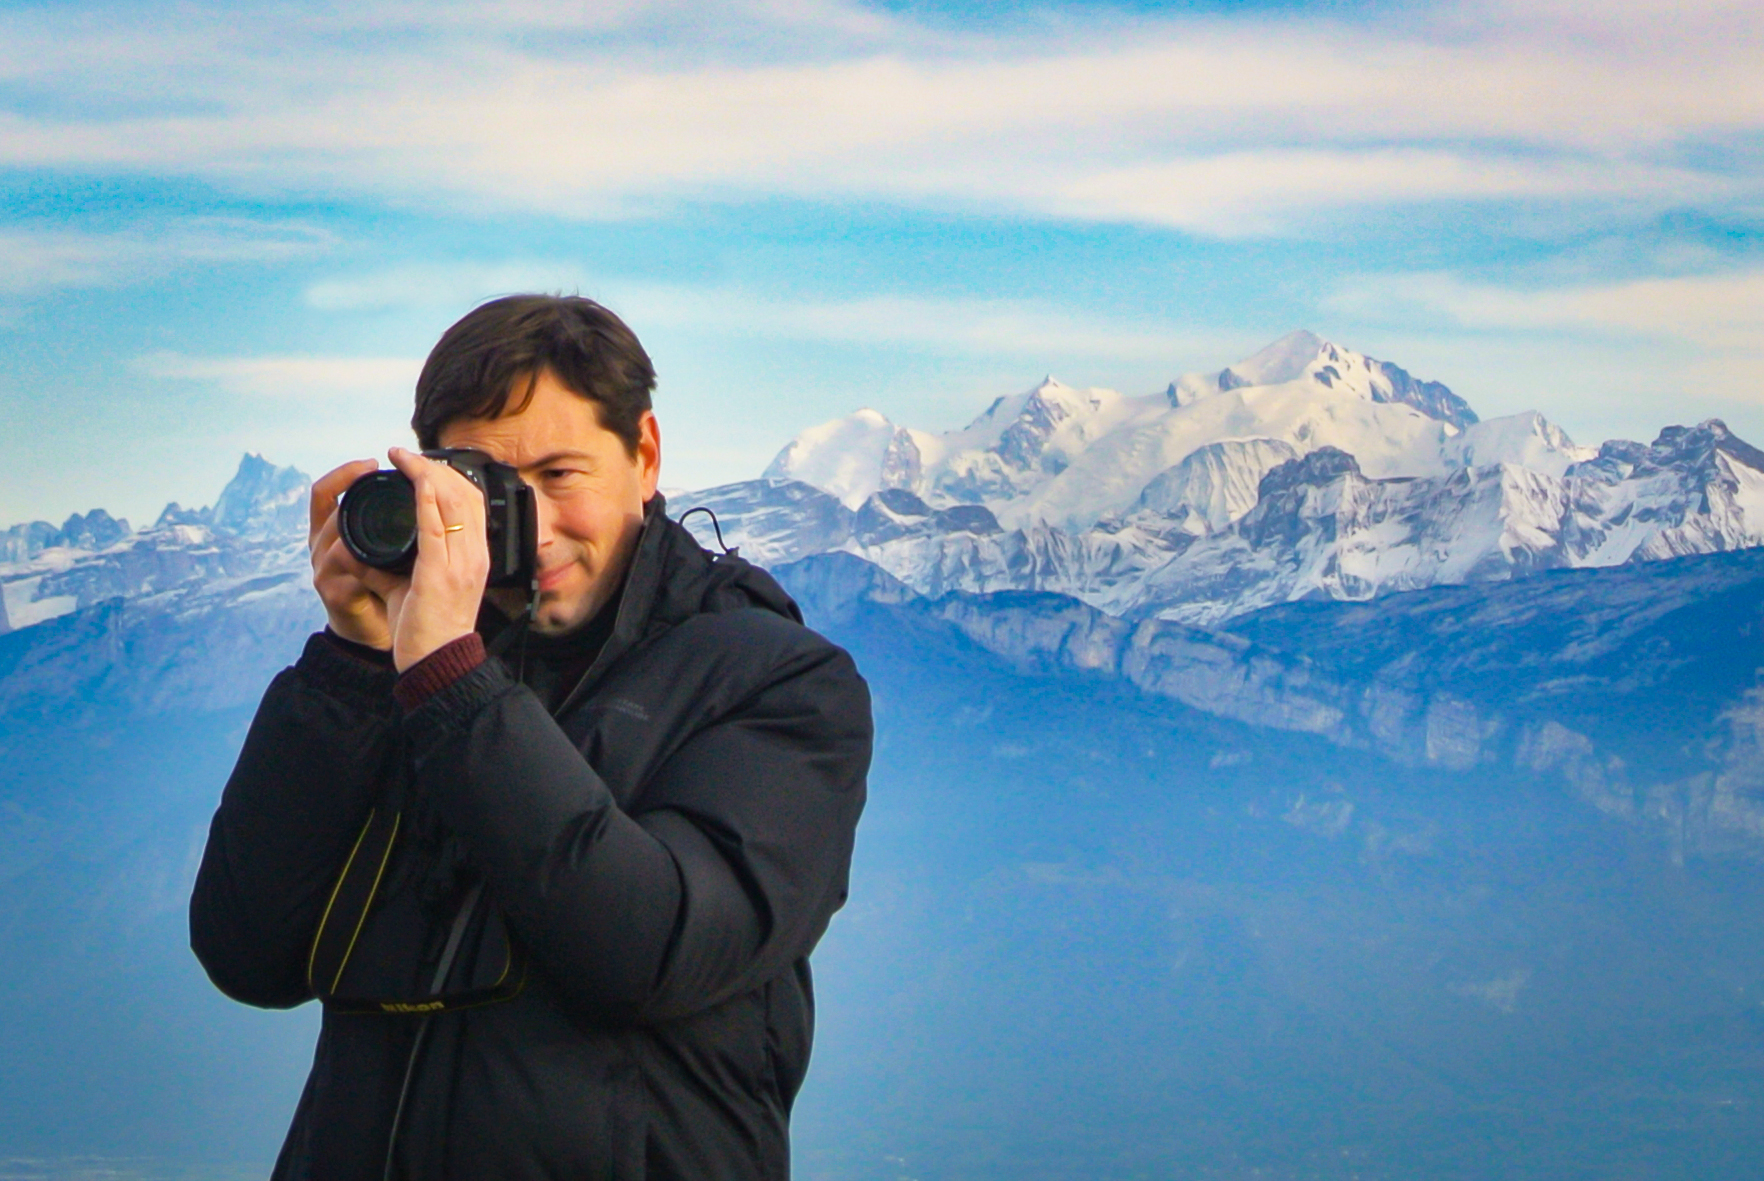 Pierre taking photos in Savoie Mont Blanc © French Moments